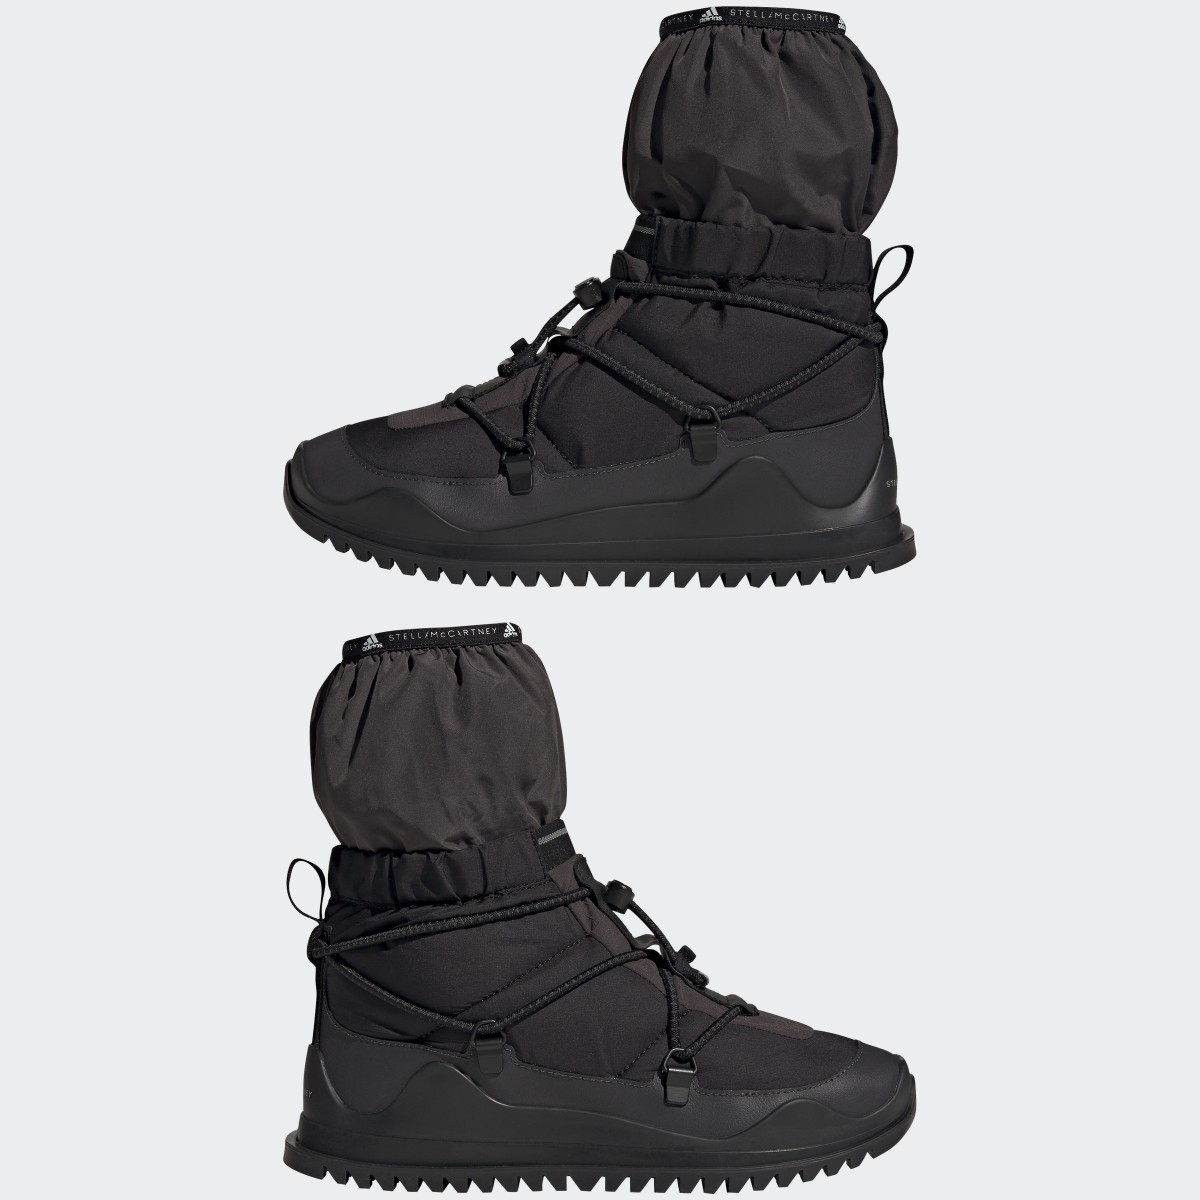 Adidas by Stella McCartney COLD.RDY Winter Boots. 8